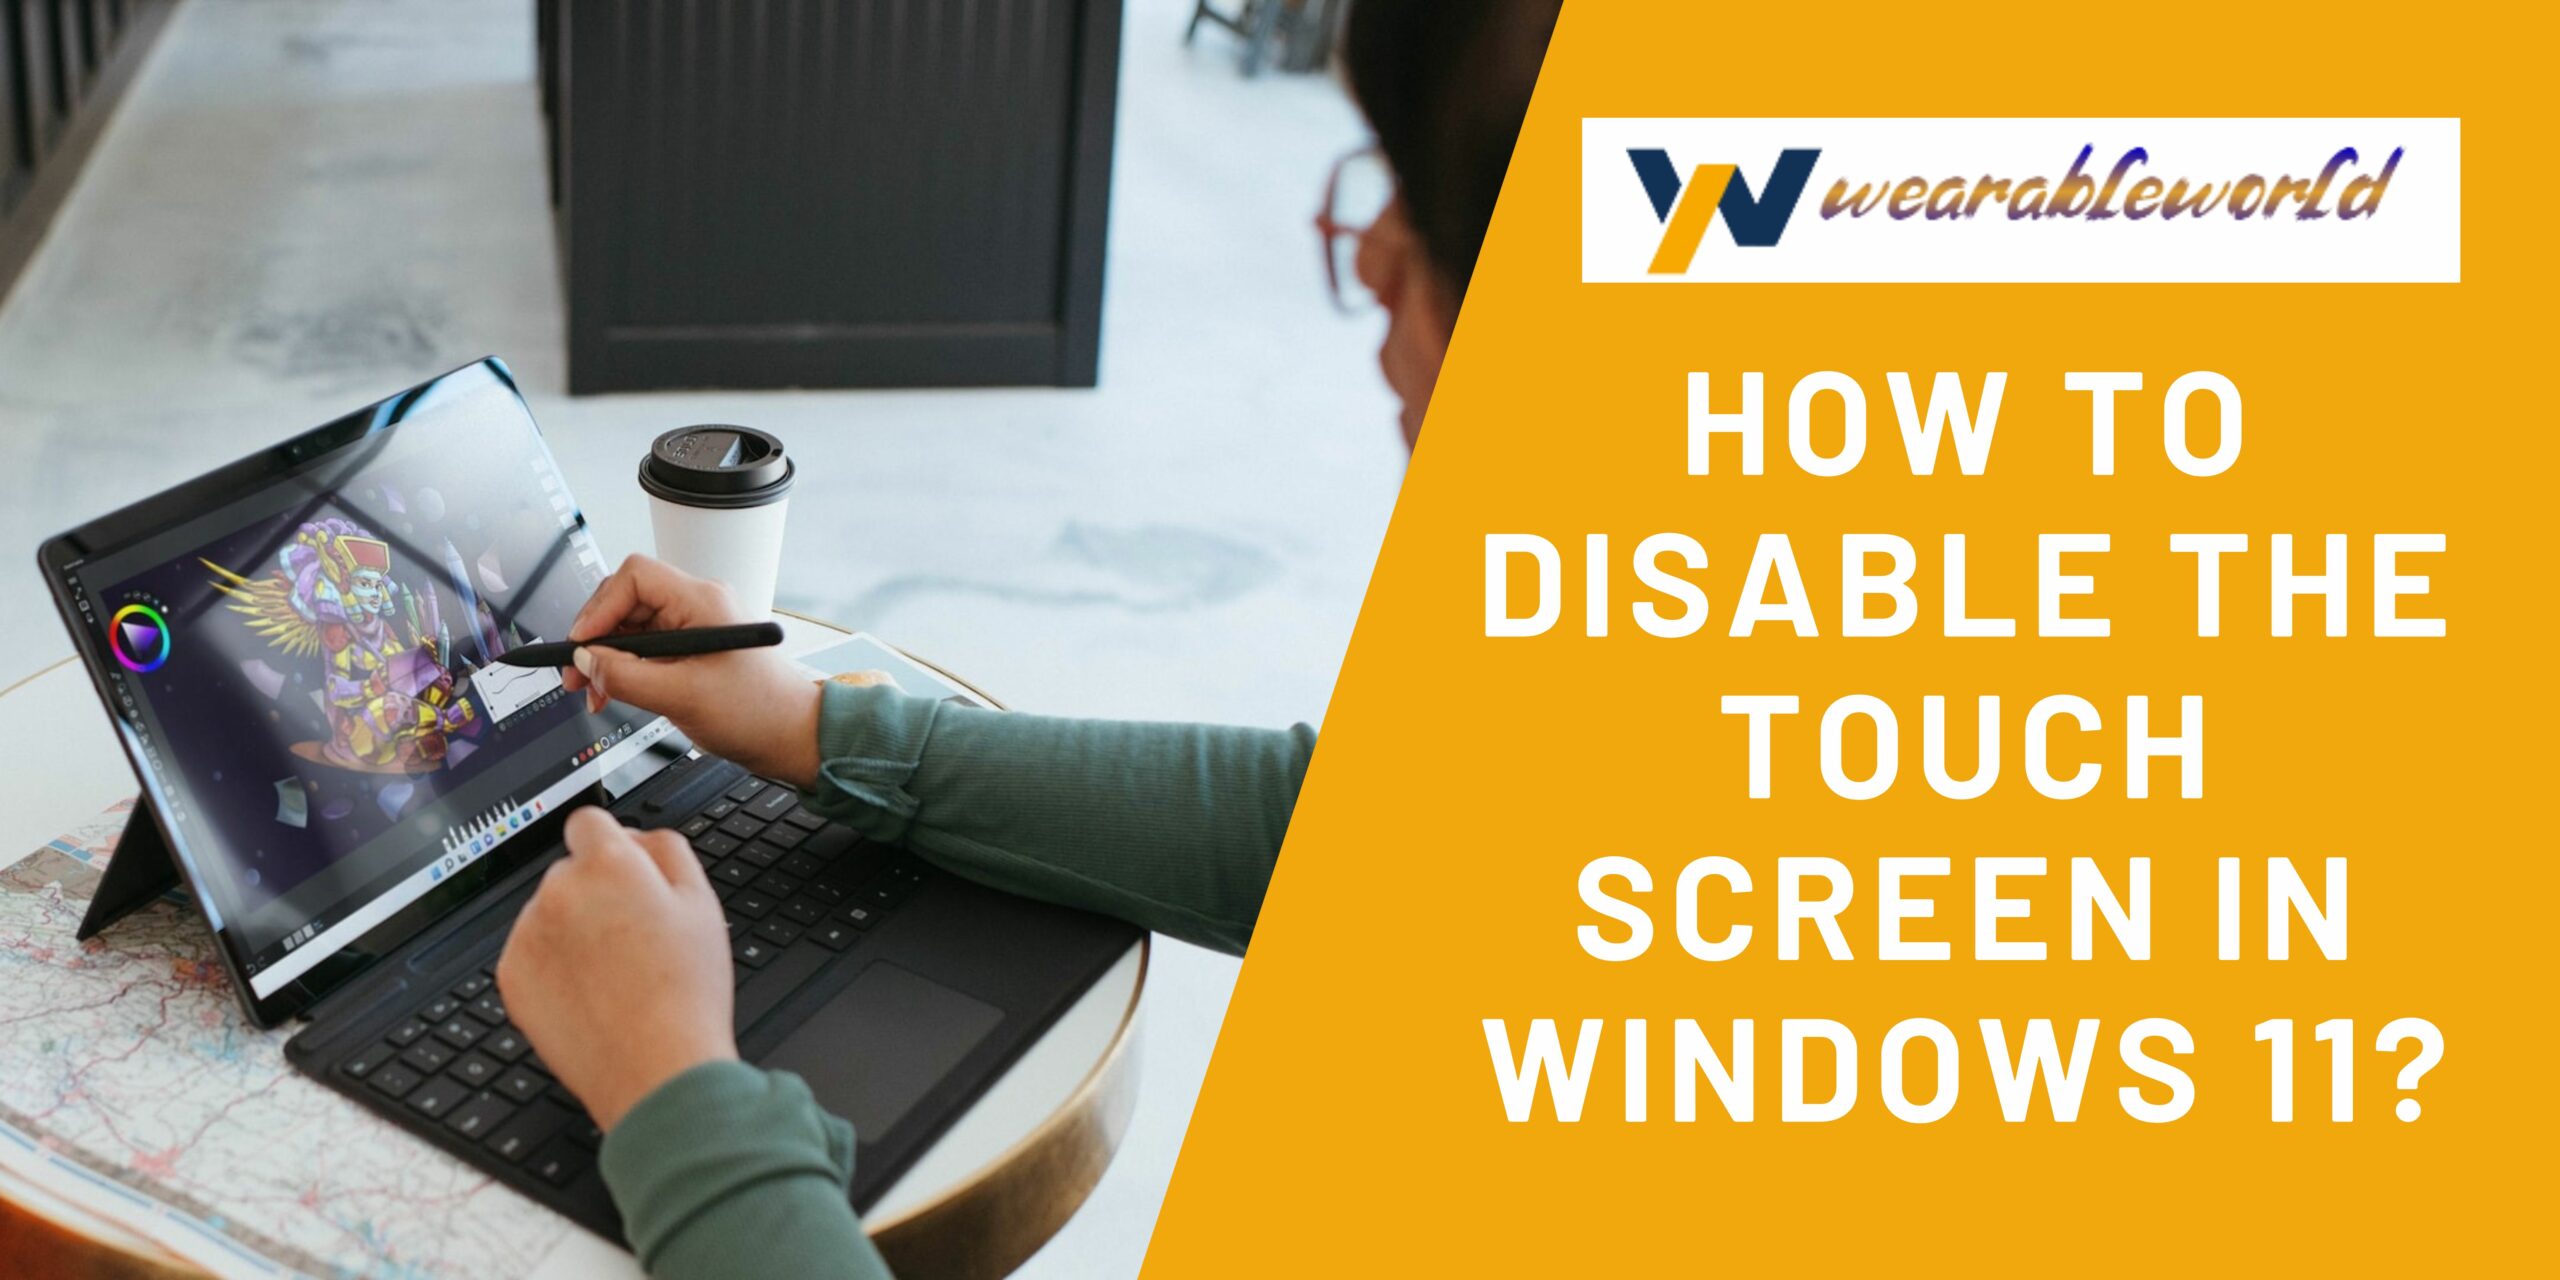 How to disable the touch screen in Windows 11